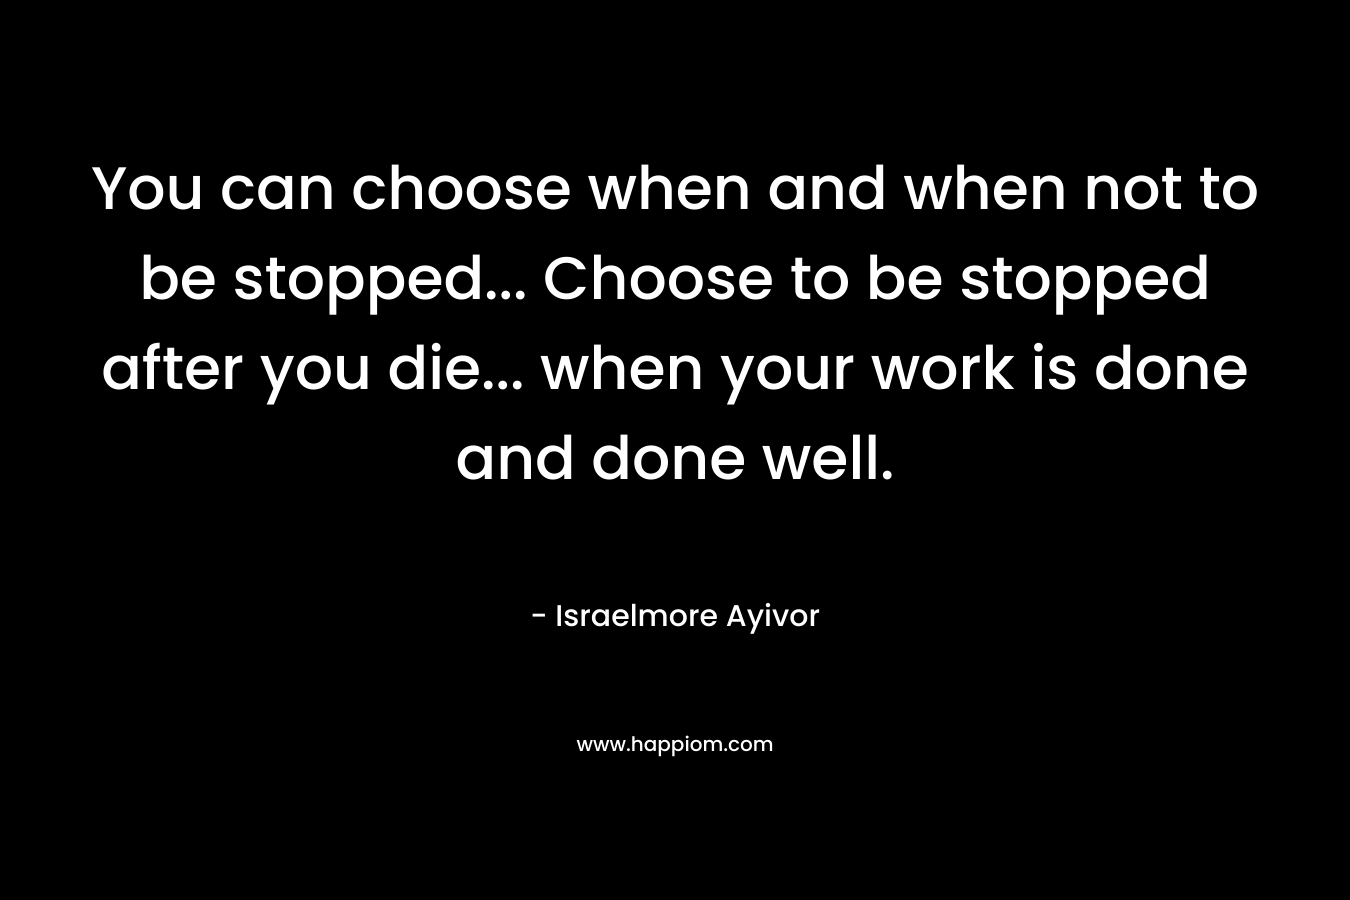 You can choose when and when not to be stopped... Choose to be stopped after you die... when your work is done and done well.